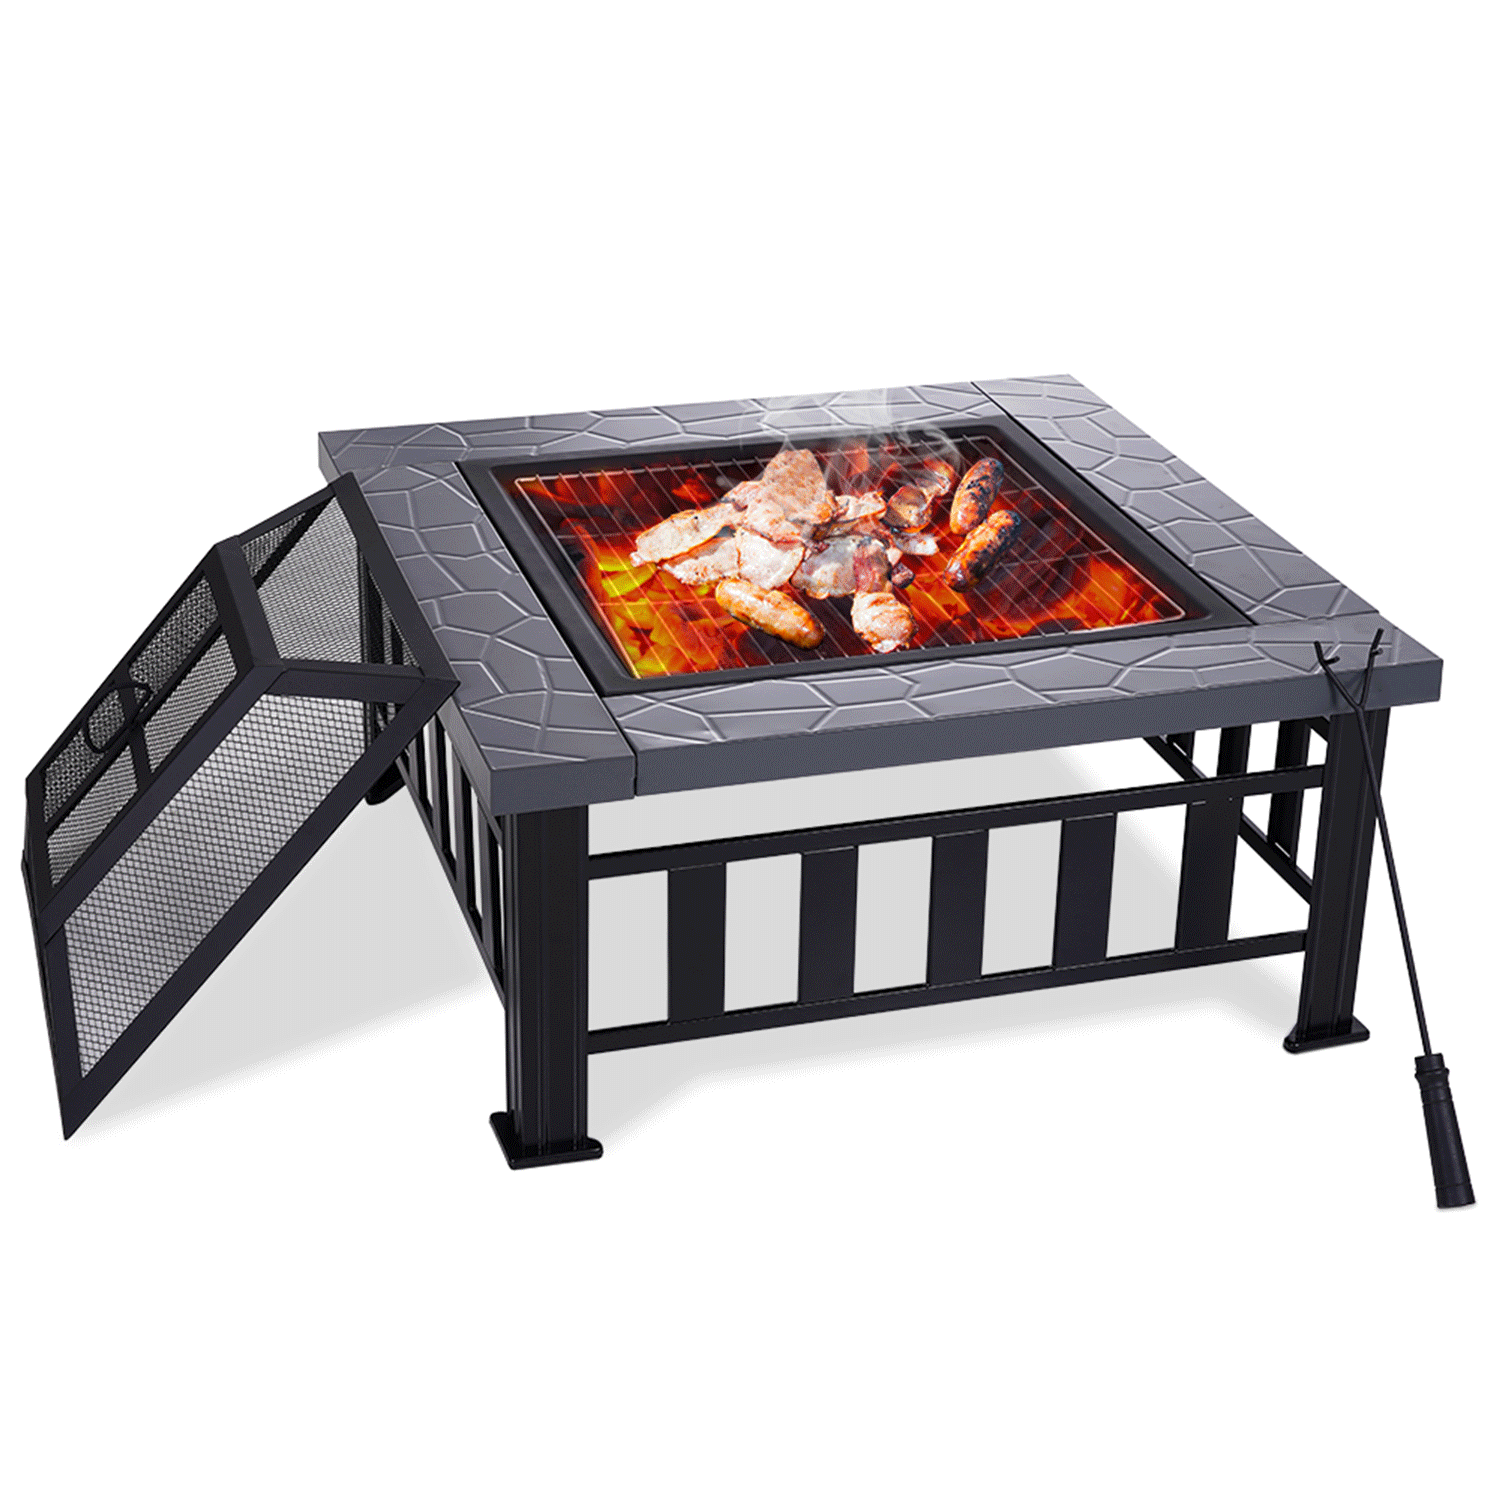 Grilled 60cm Outdoor Fire Pit Leaf Cut-out Design Patio Fireplace Garden Stove 